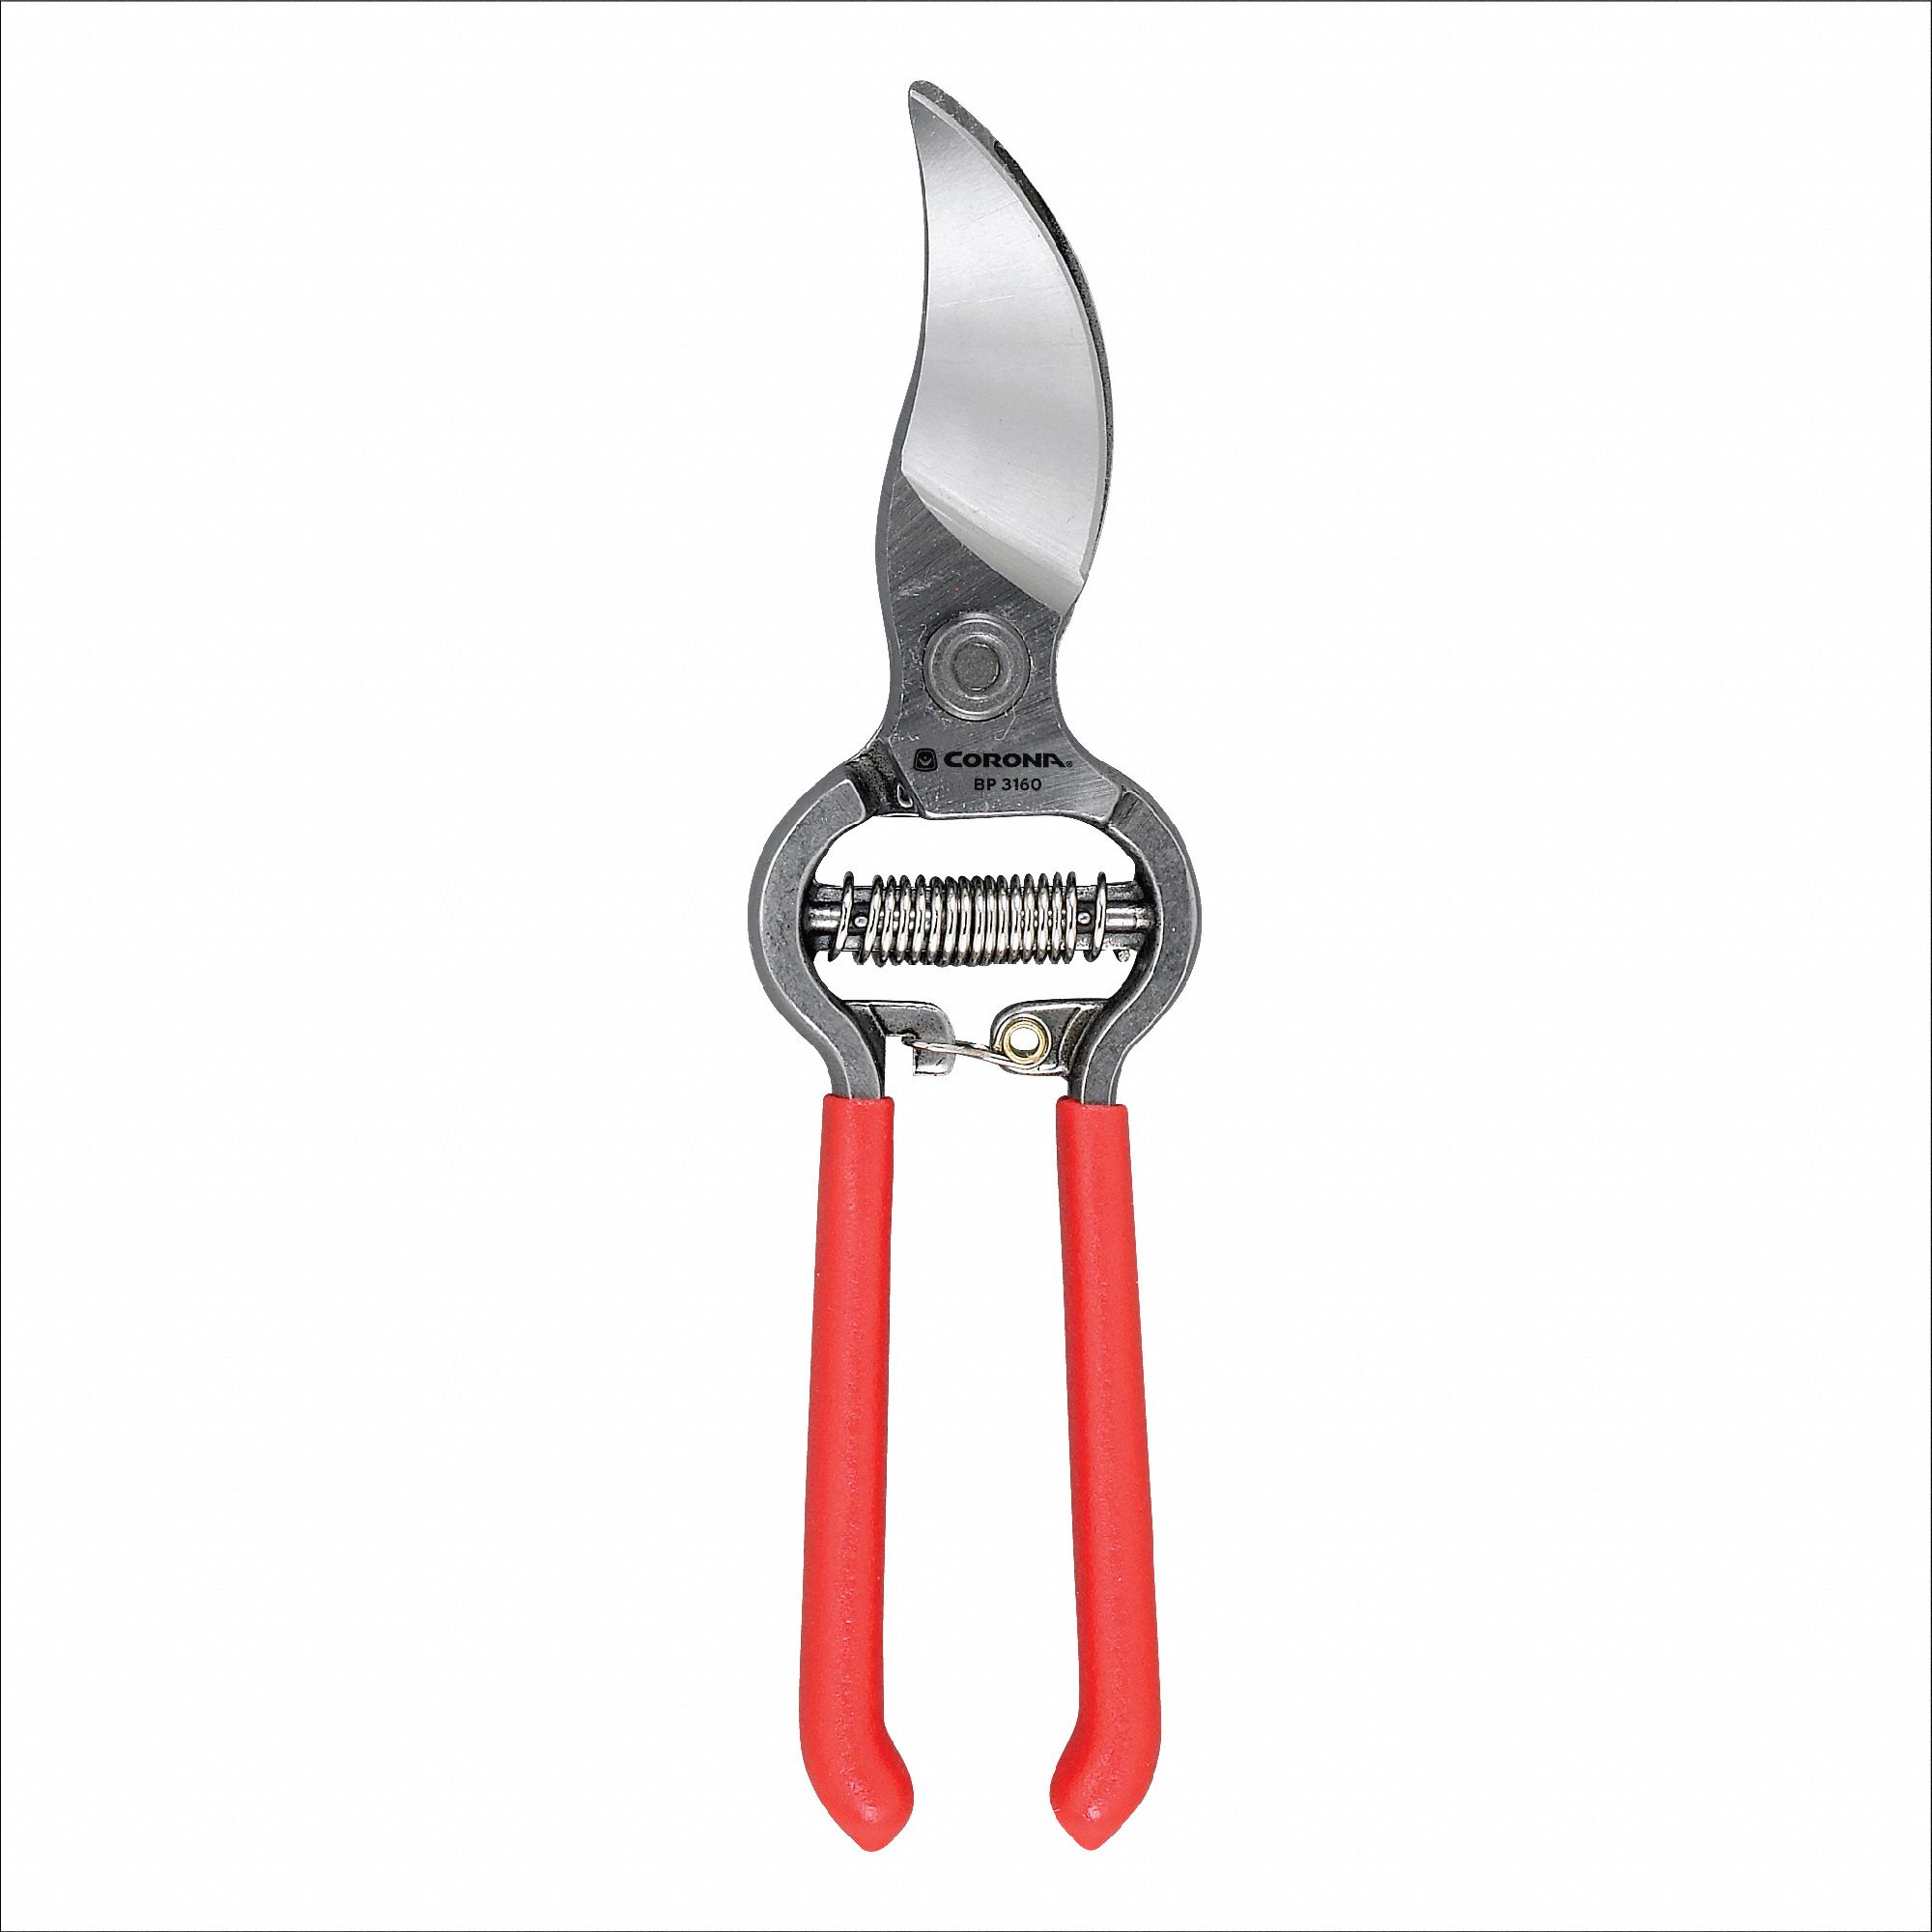 Bypass Pruner: 2 3/4 in Blade Lg, 8 1/4 in Overall Lg, 3/4 in, Steel, Metal